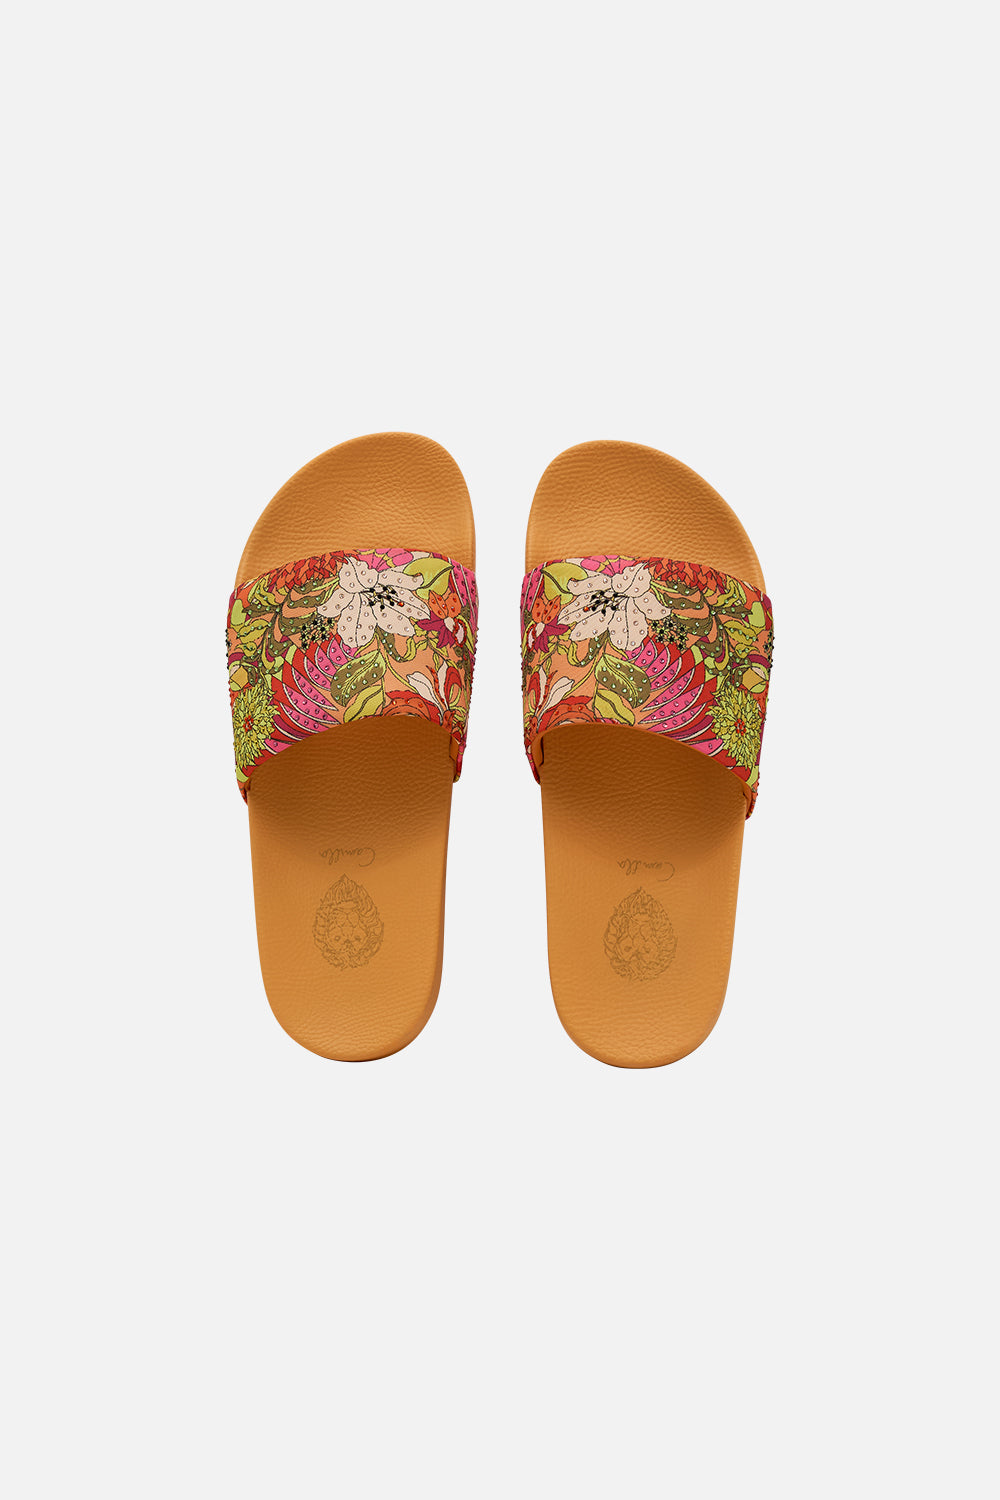 CAMILLA floral Amelia pool slides in The Flower Child Society